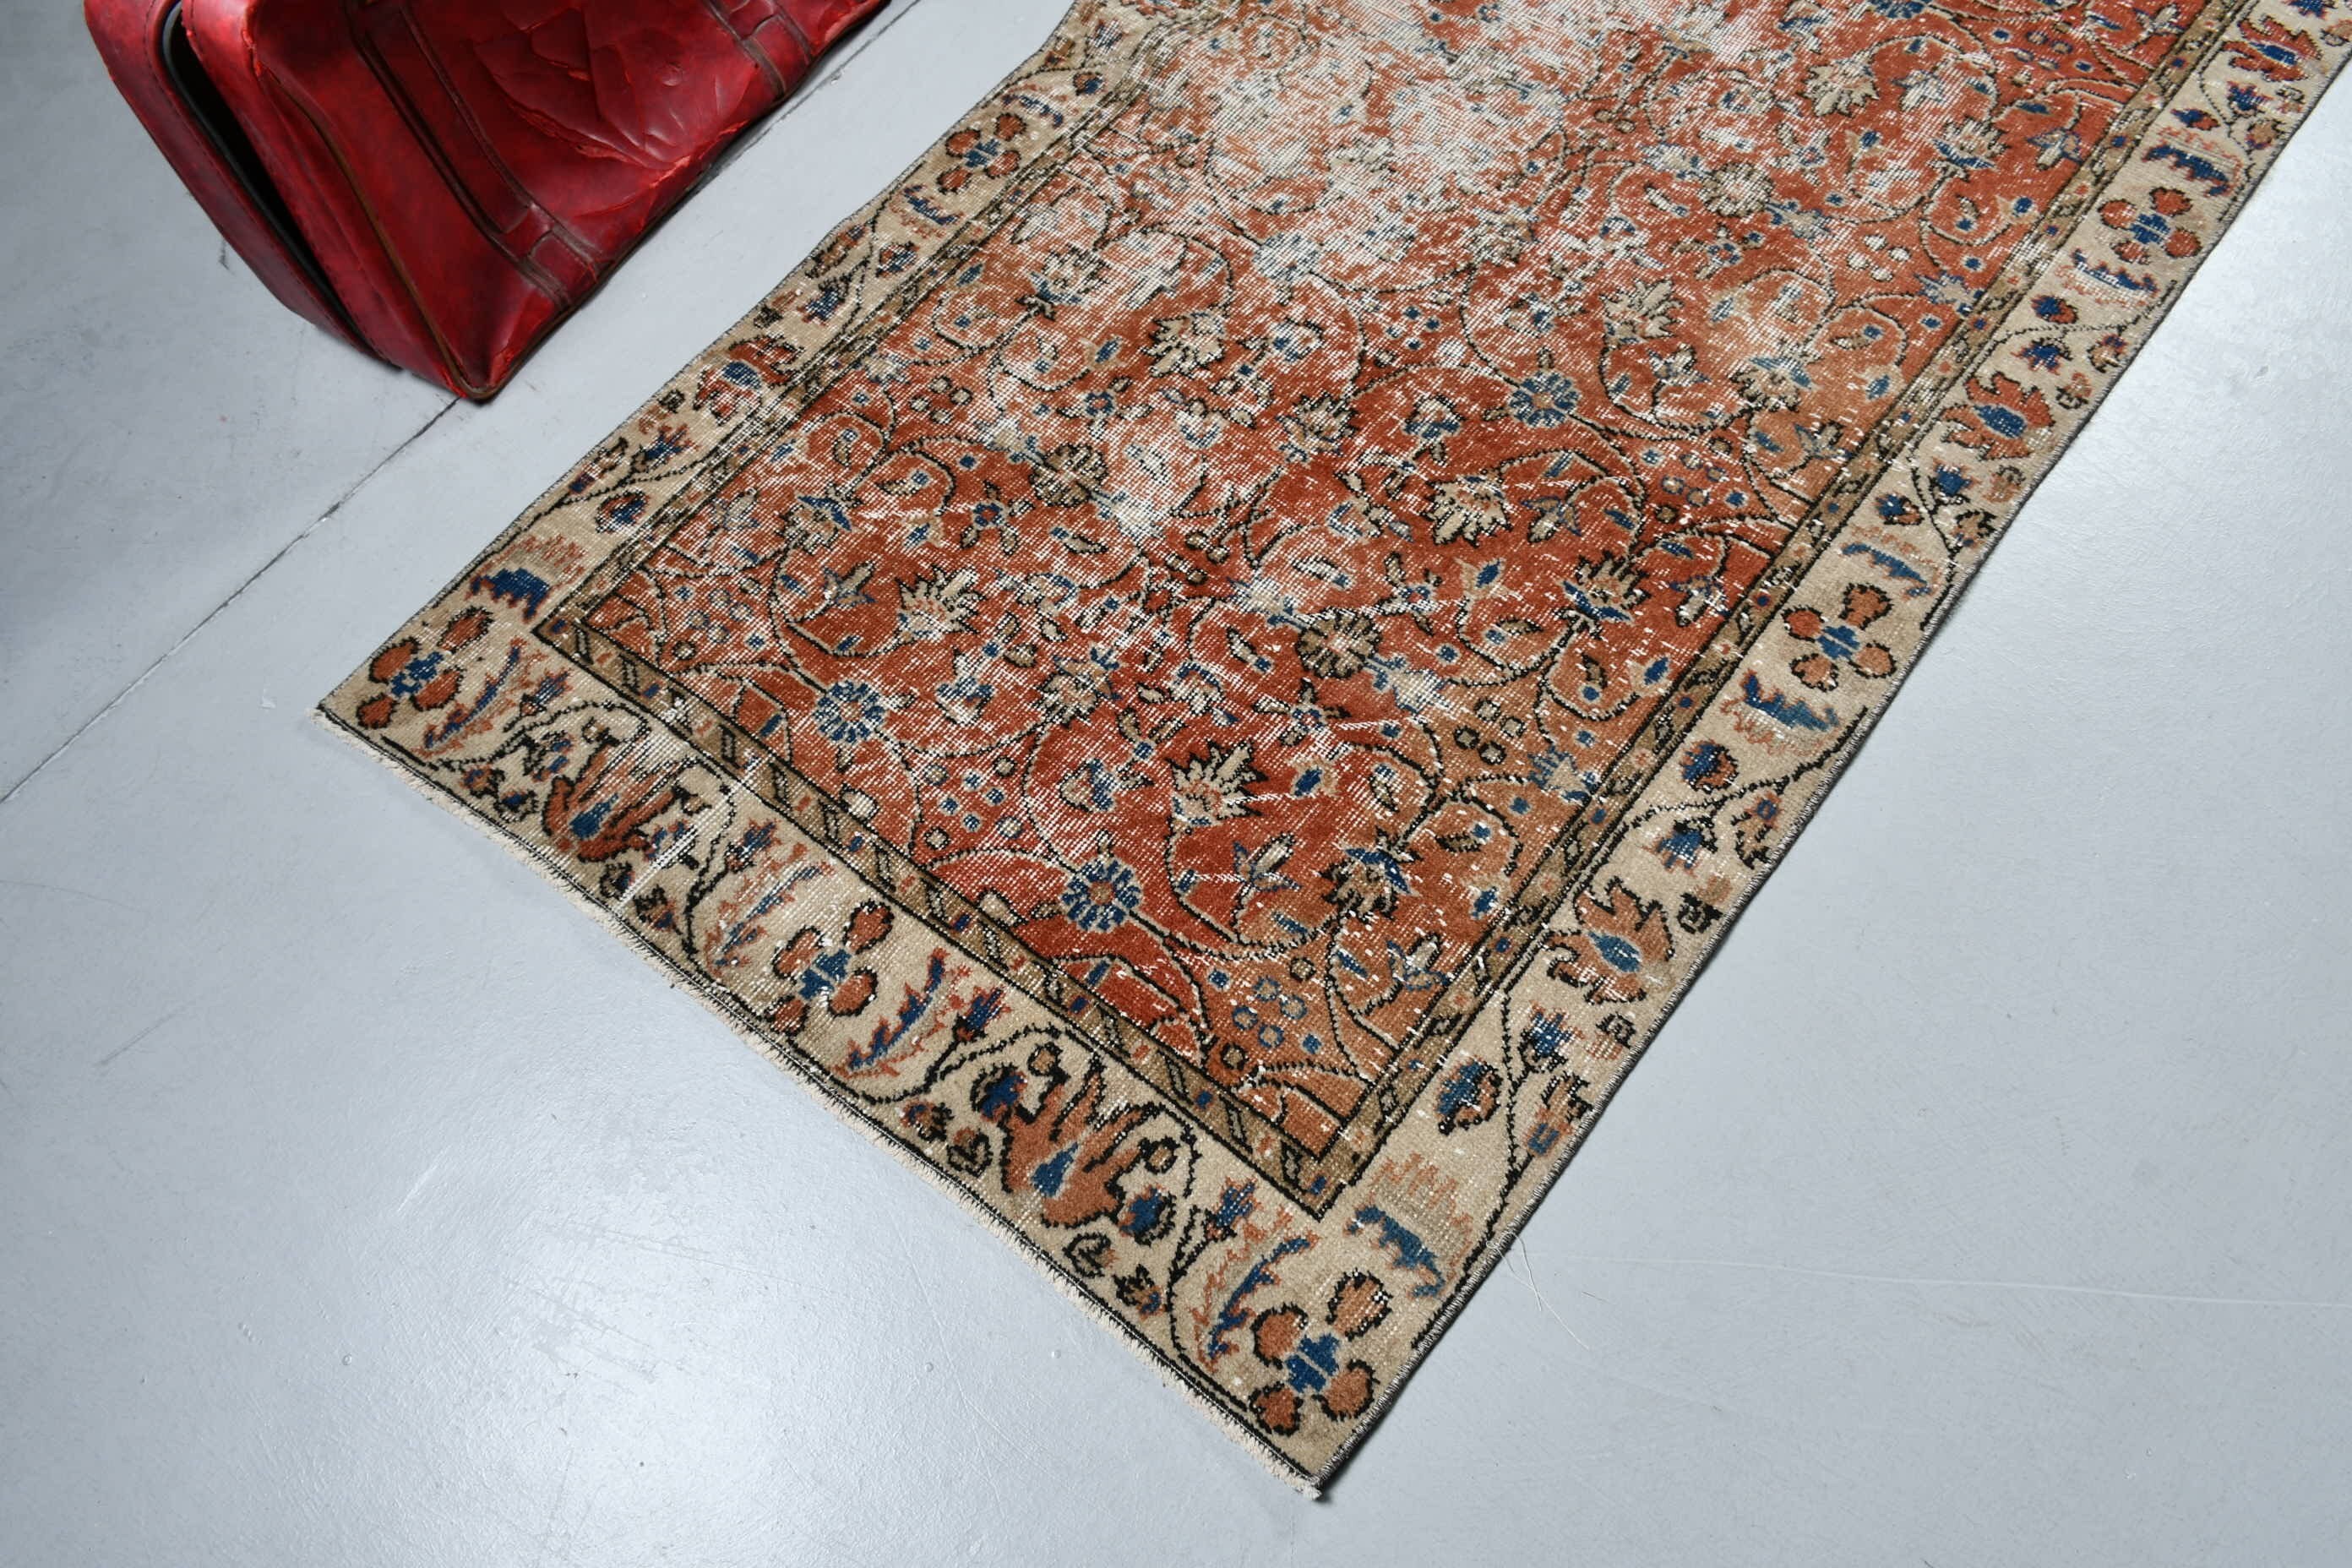 Entry Rug, Rugs for Entry, Oriental Rugs, Turkish Rugs, Kitchen Rug, Vintage Rugs, Red Oriental Rugs, 3.3x6.1 ft Accent Rug